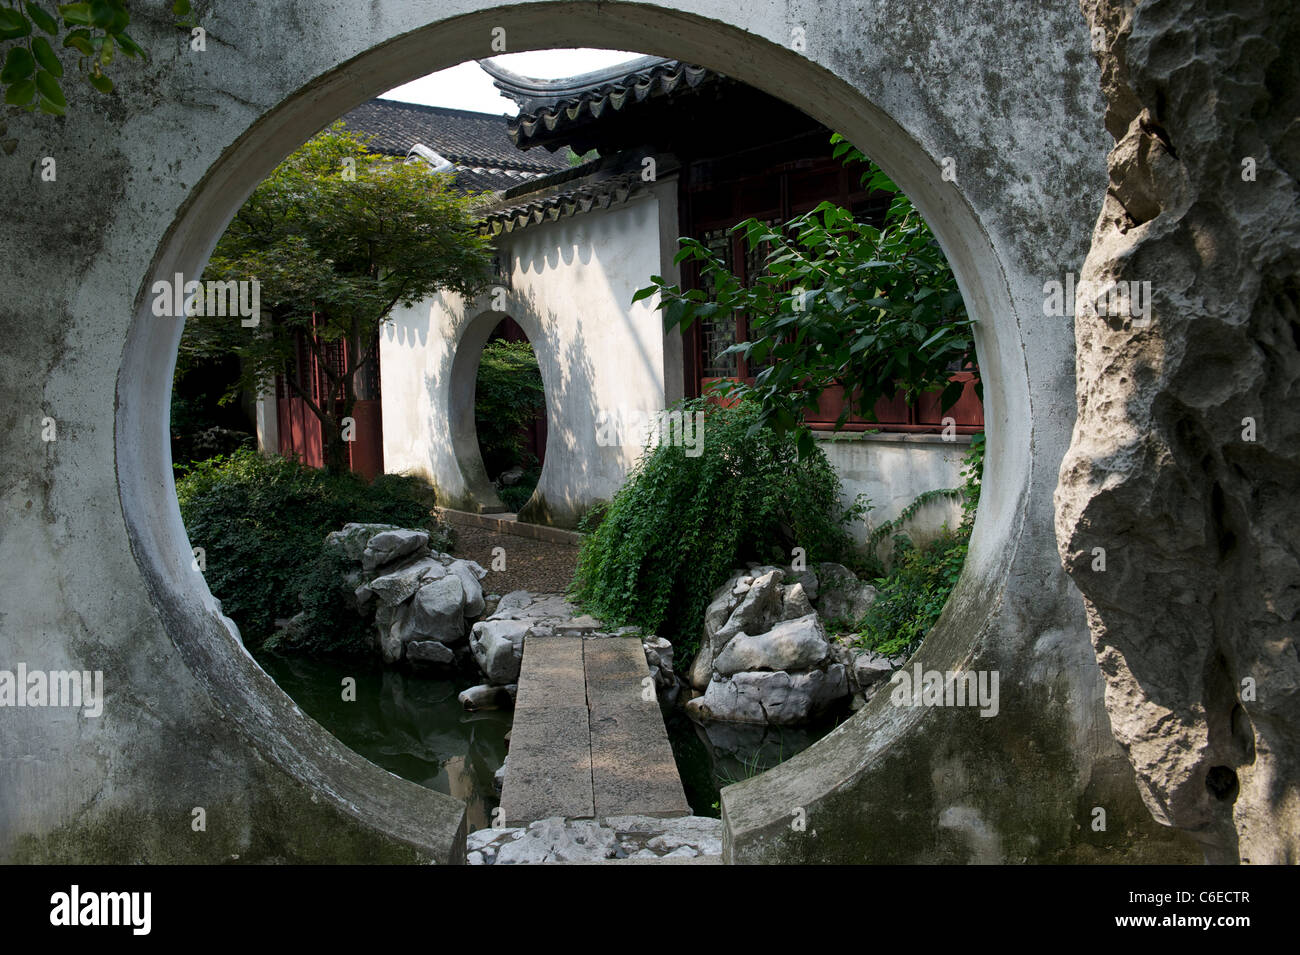 Yipu Garden in Suzhou, a World Cultural Heritage Listed by the UNESCO. 13-Aug-2011 Stock Photo